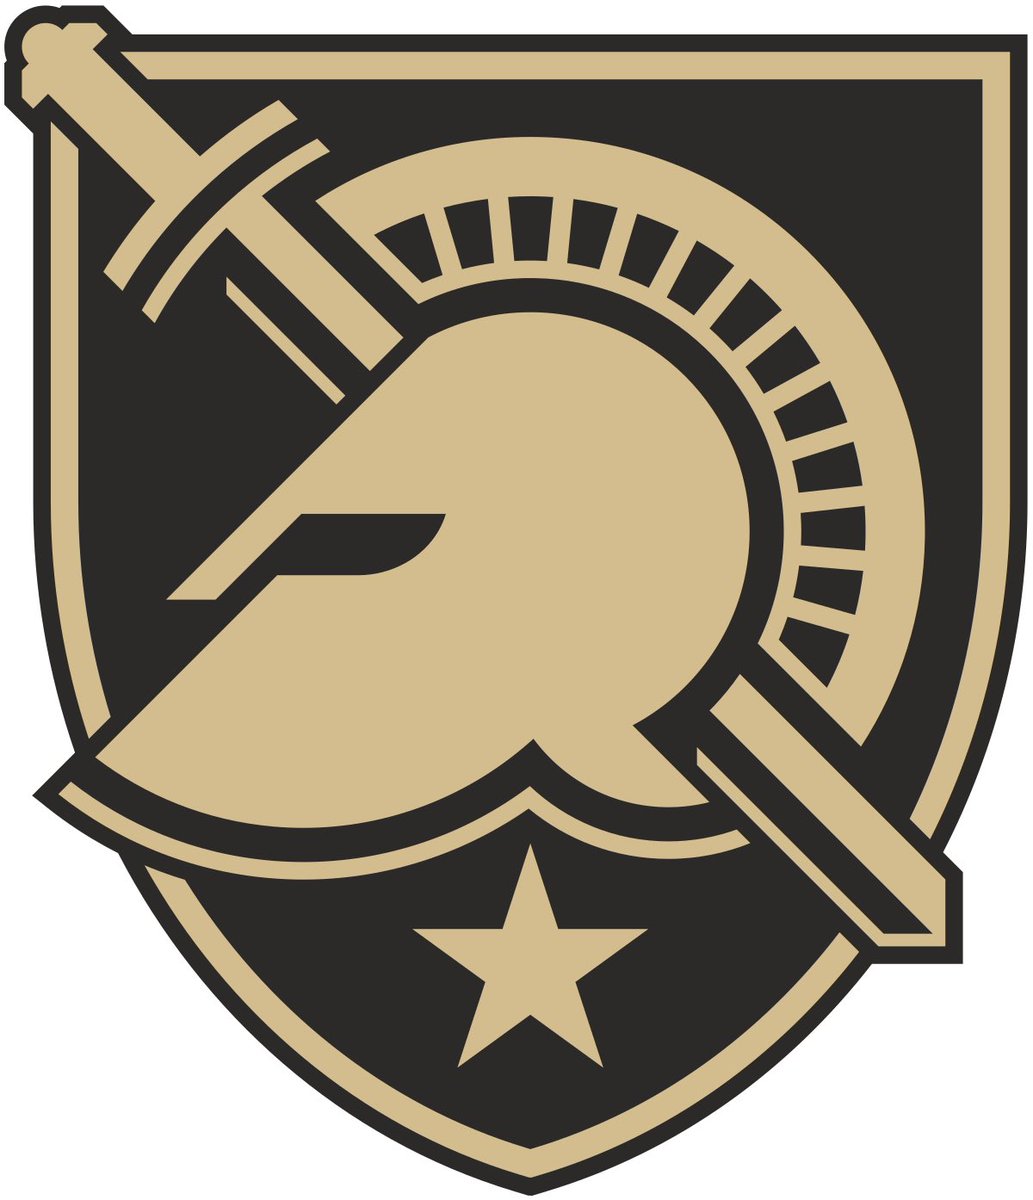 After a great zoom call with @ArmyCoachAllen and @coachh2j I am extremely blessed to receive an offer from Army West Point! Thank you for believing in me.